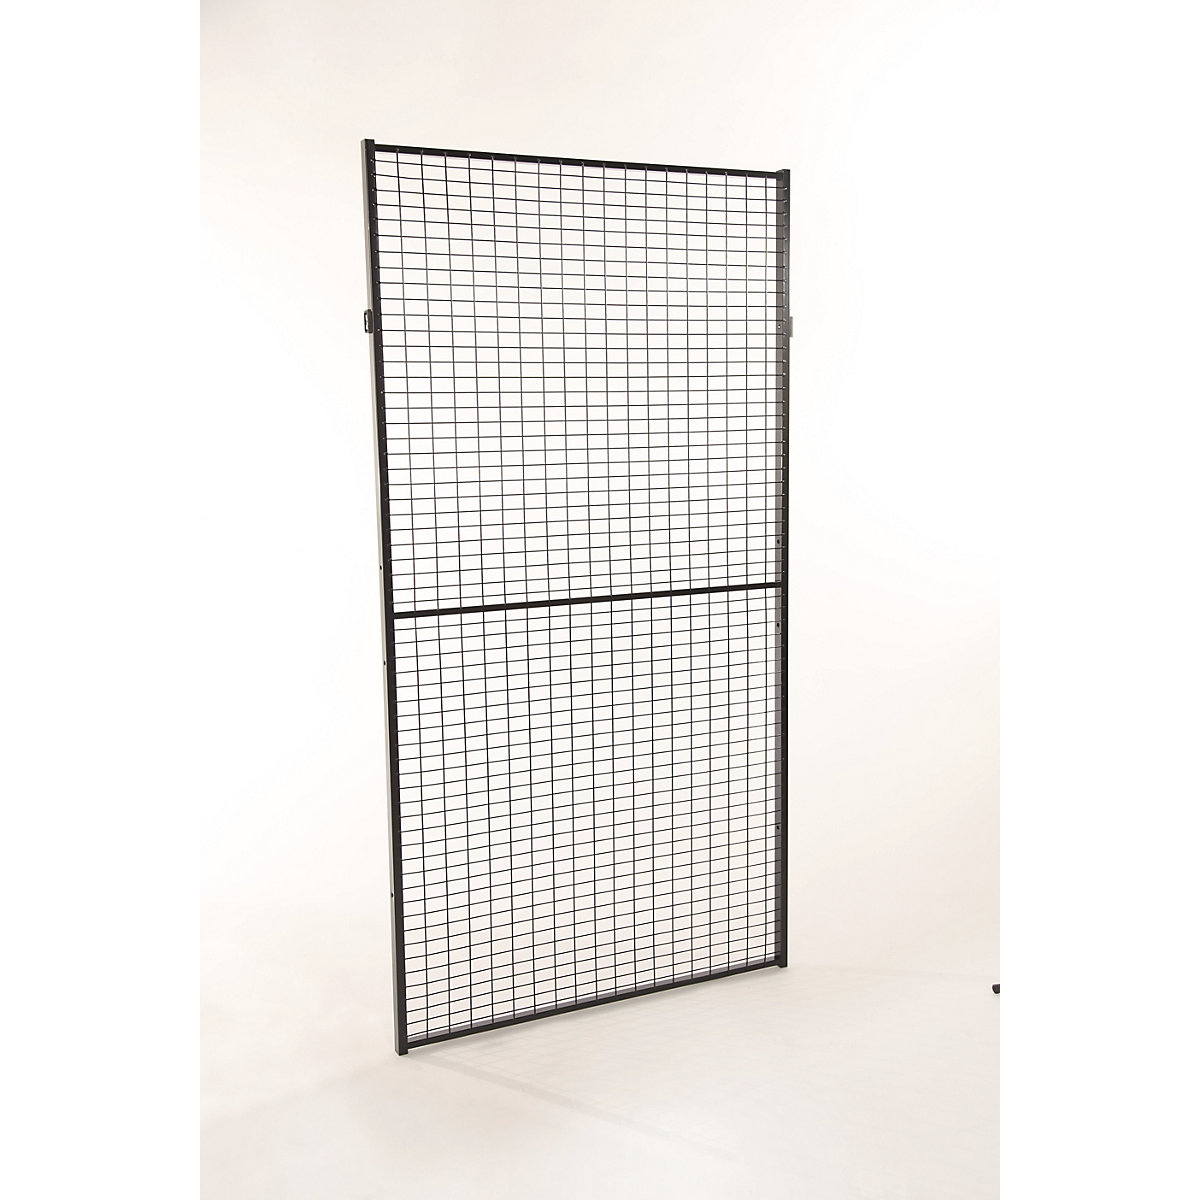 X-GUARD CLASSIC machine protective fencing, wall section - Axelent